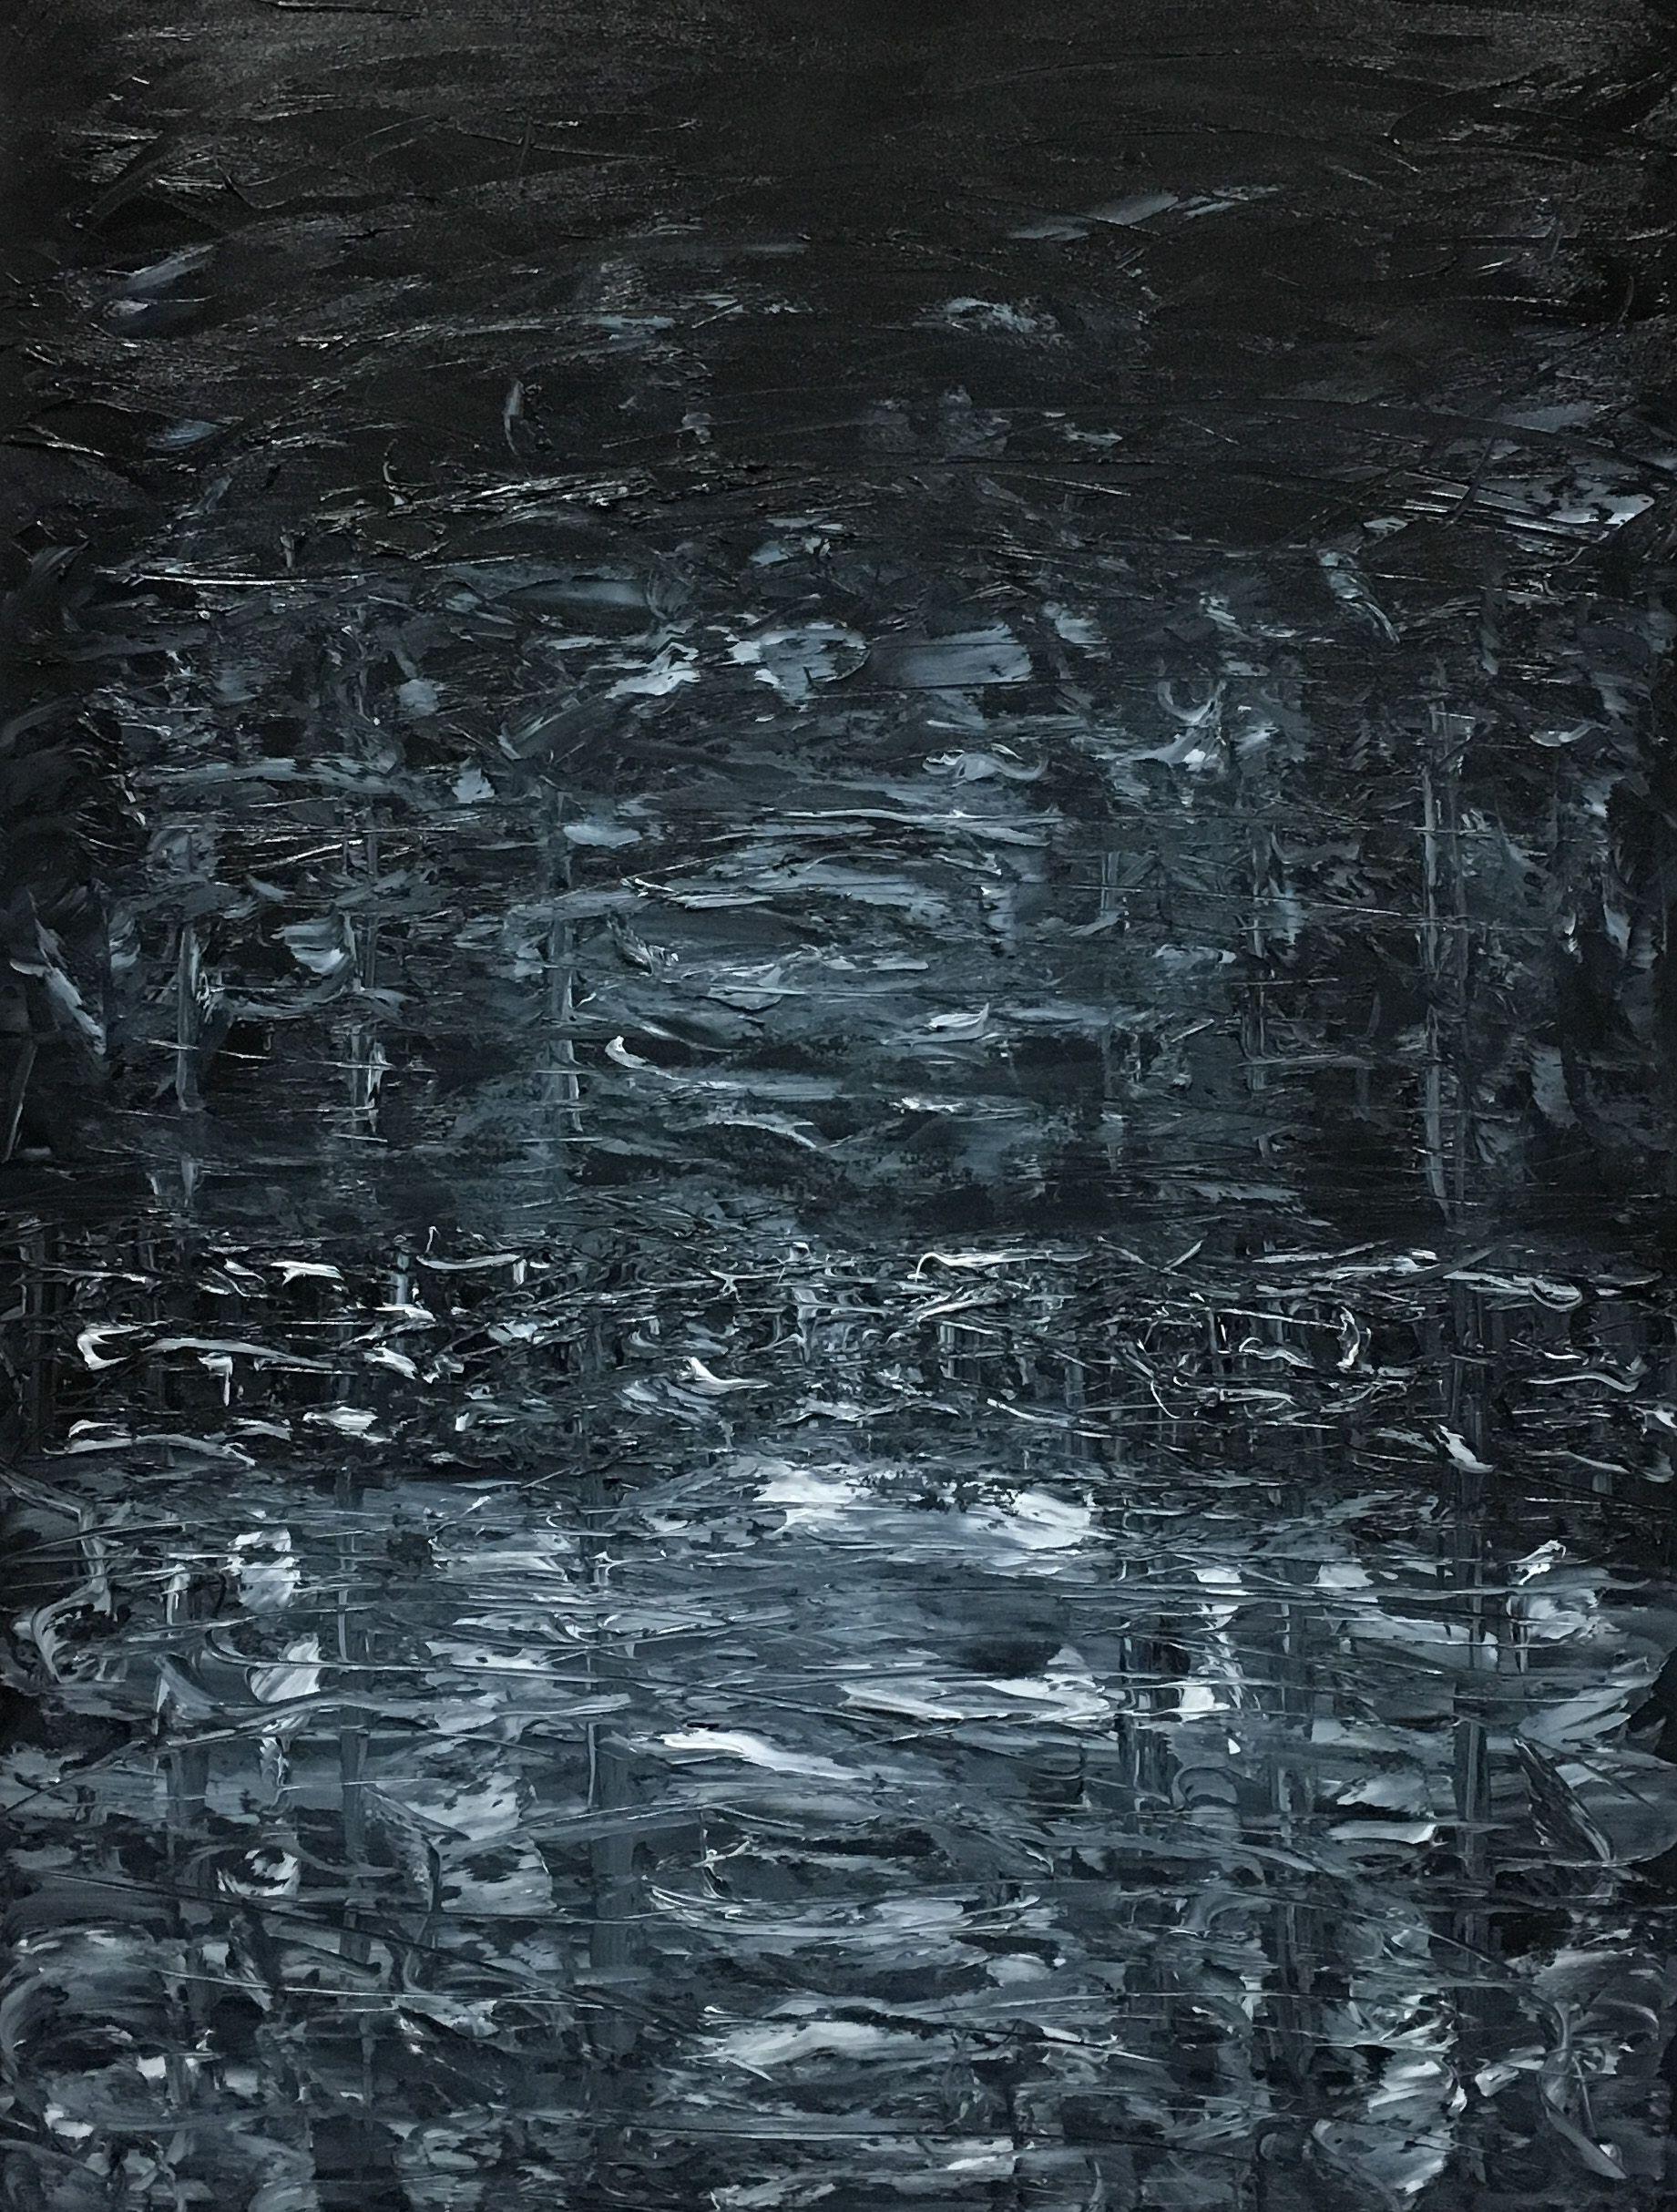 Gabriela Horikawa Abstract Painting - Untitled 2-15-19 night reflections, Painting, Oil on Paper